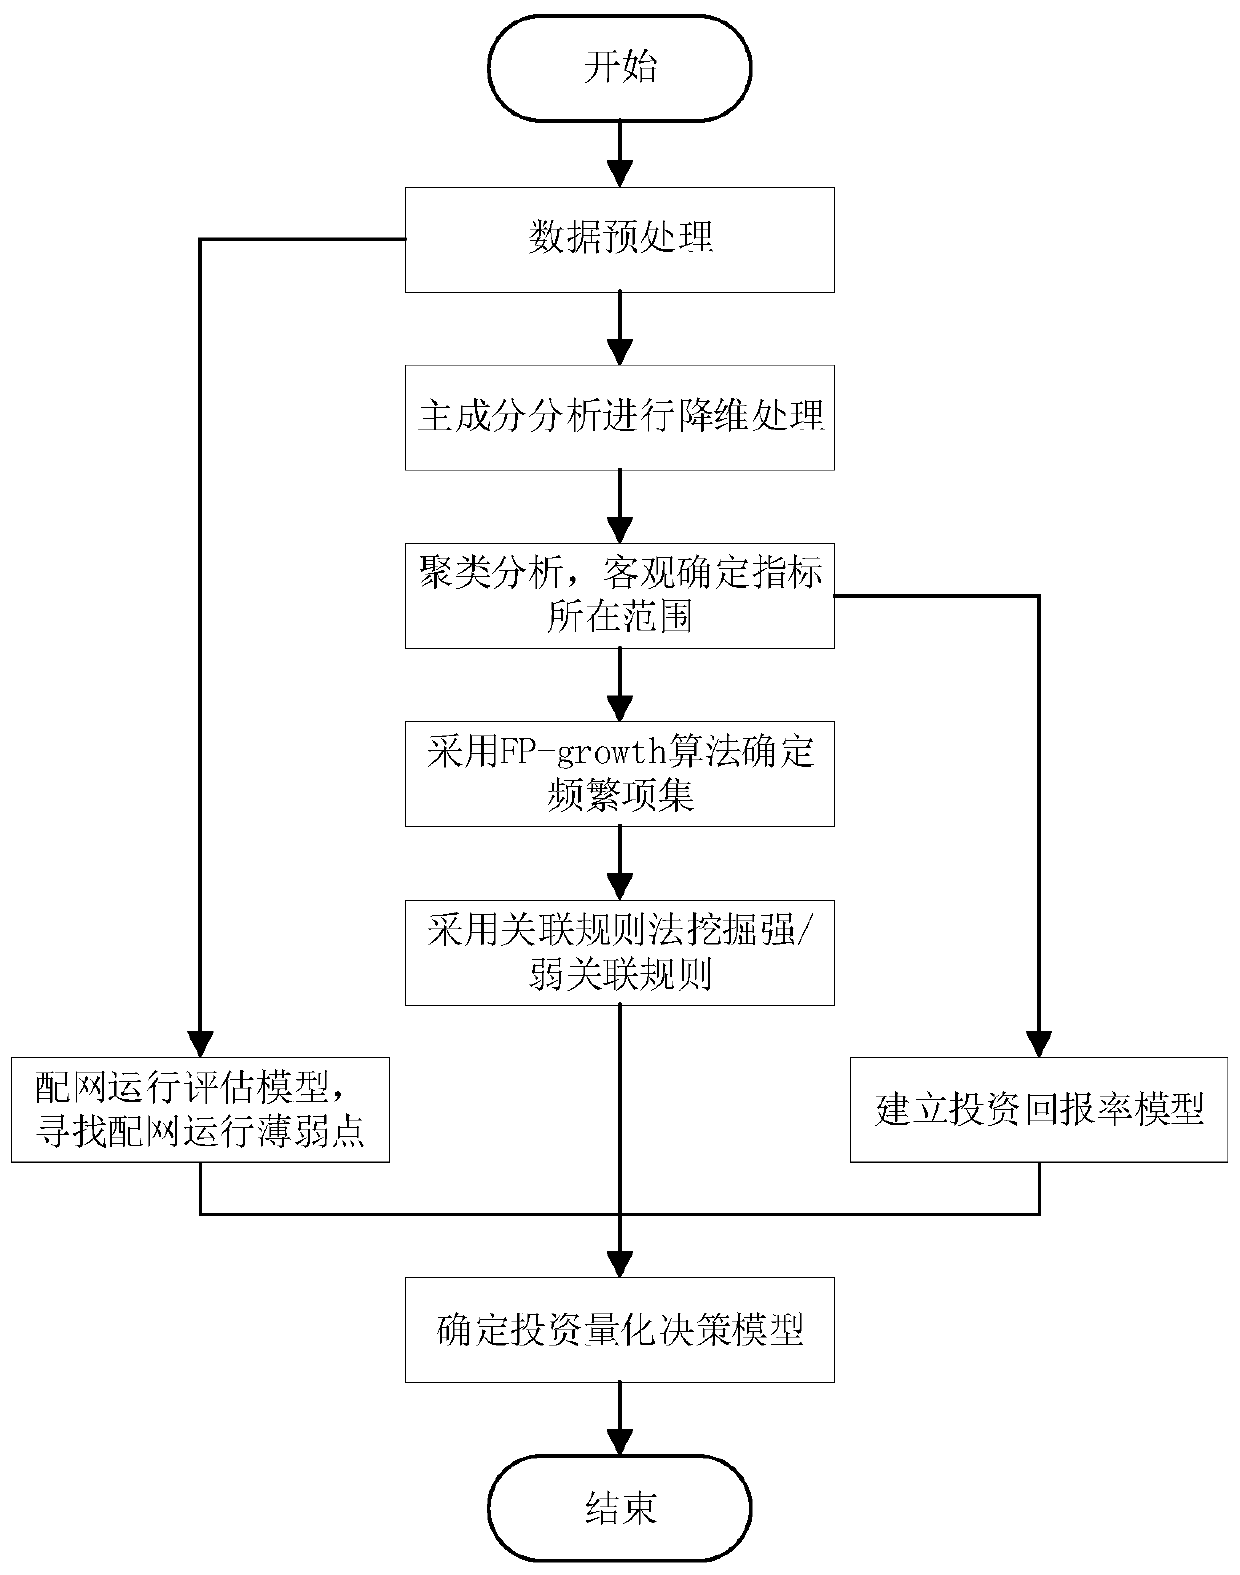 Distribution network analysis and investment decision method based on association rule mining